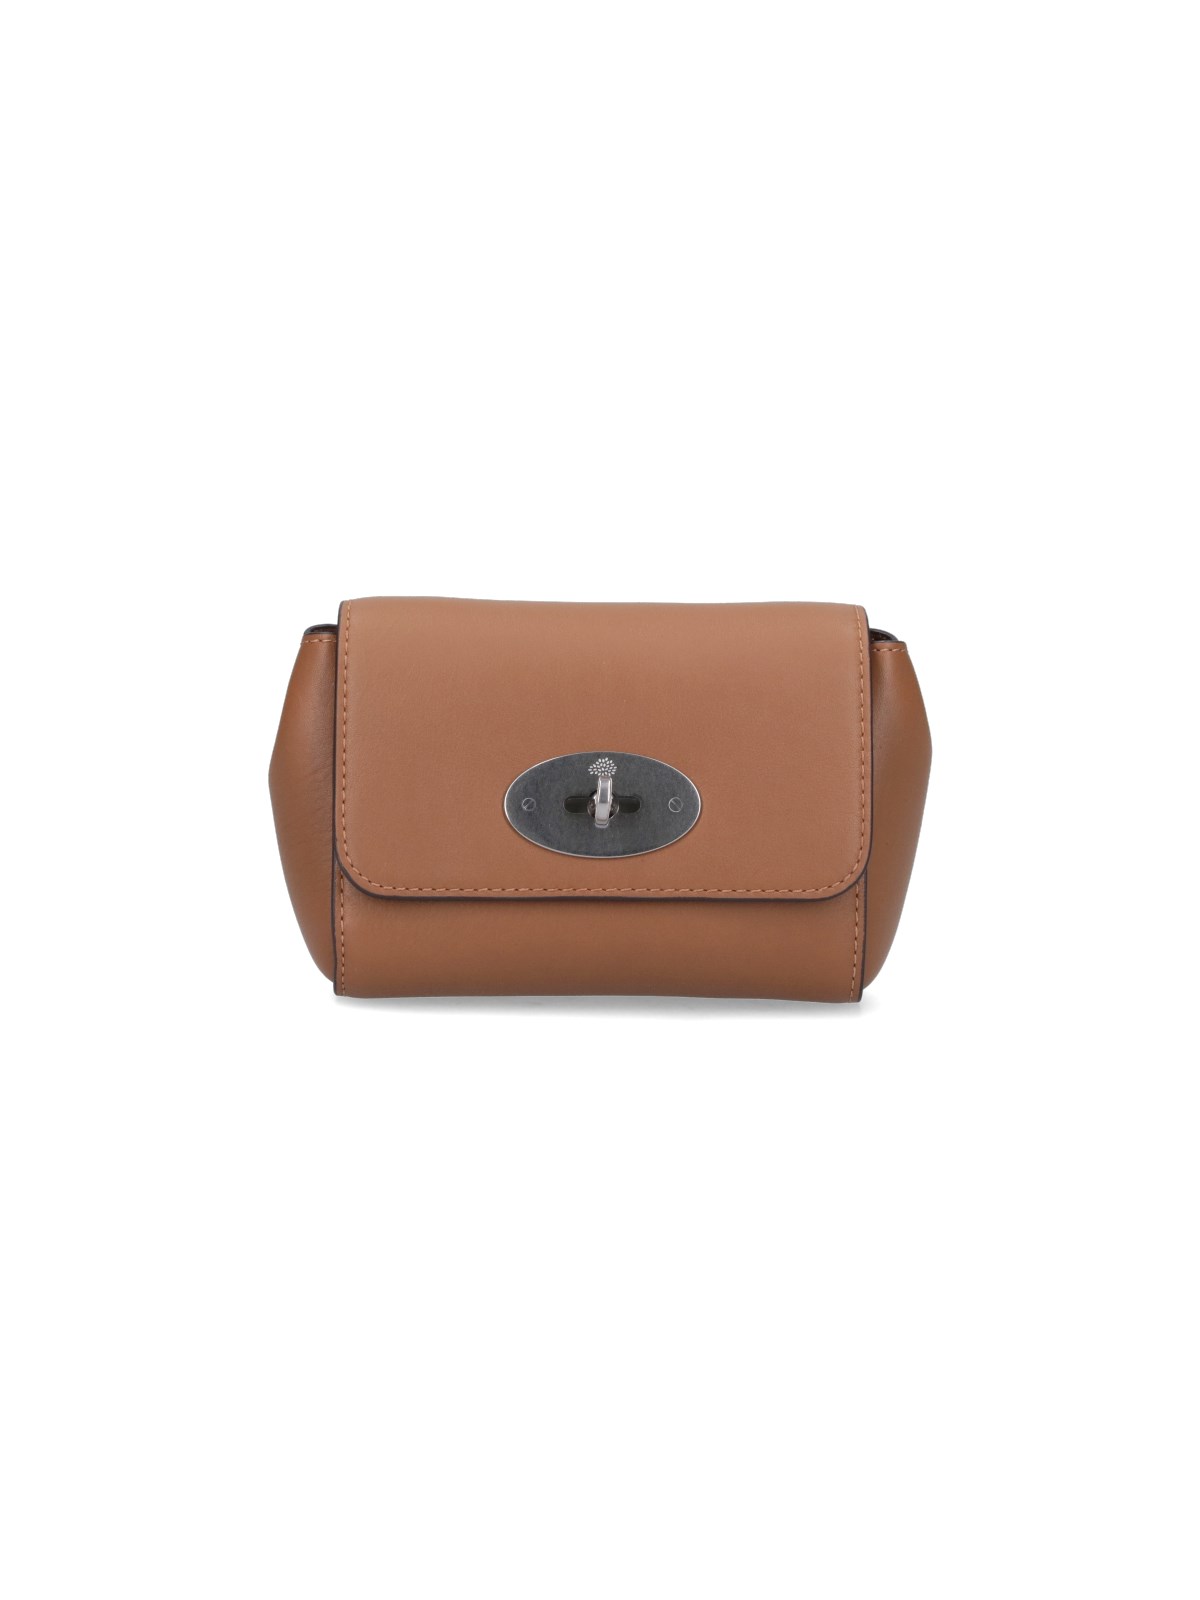 Mulberry Mini Lily Leather Bag In Brown